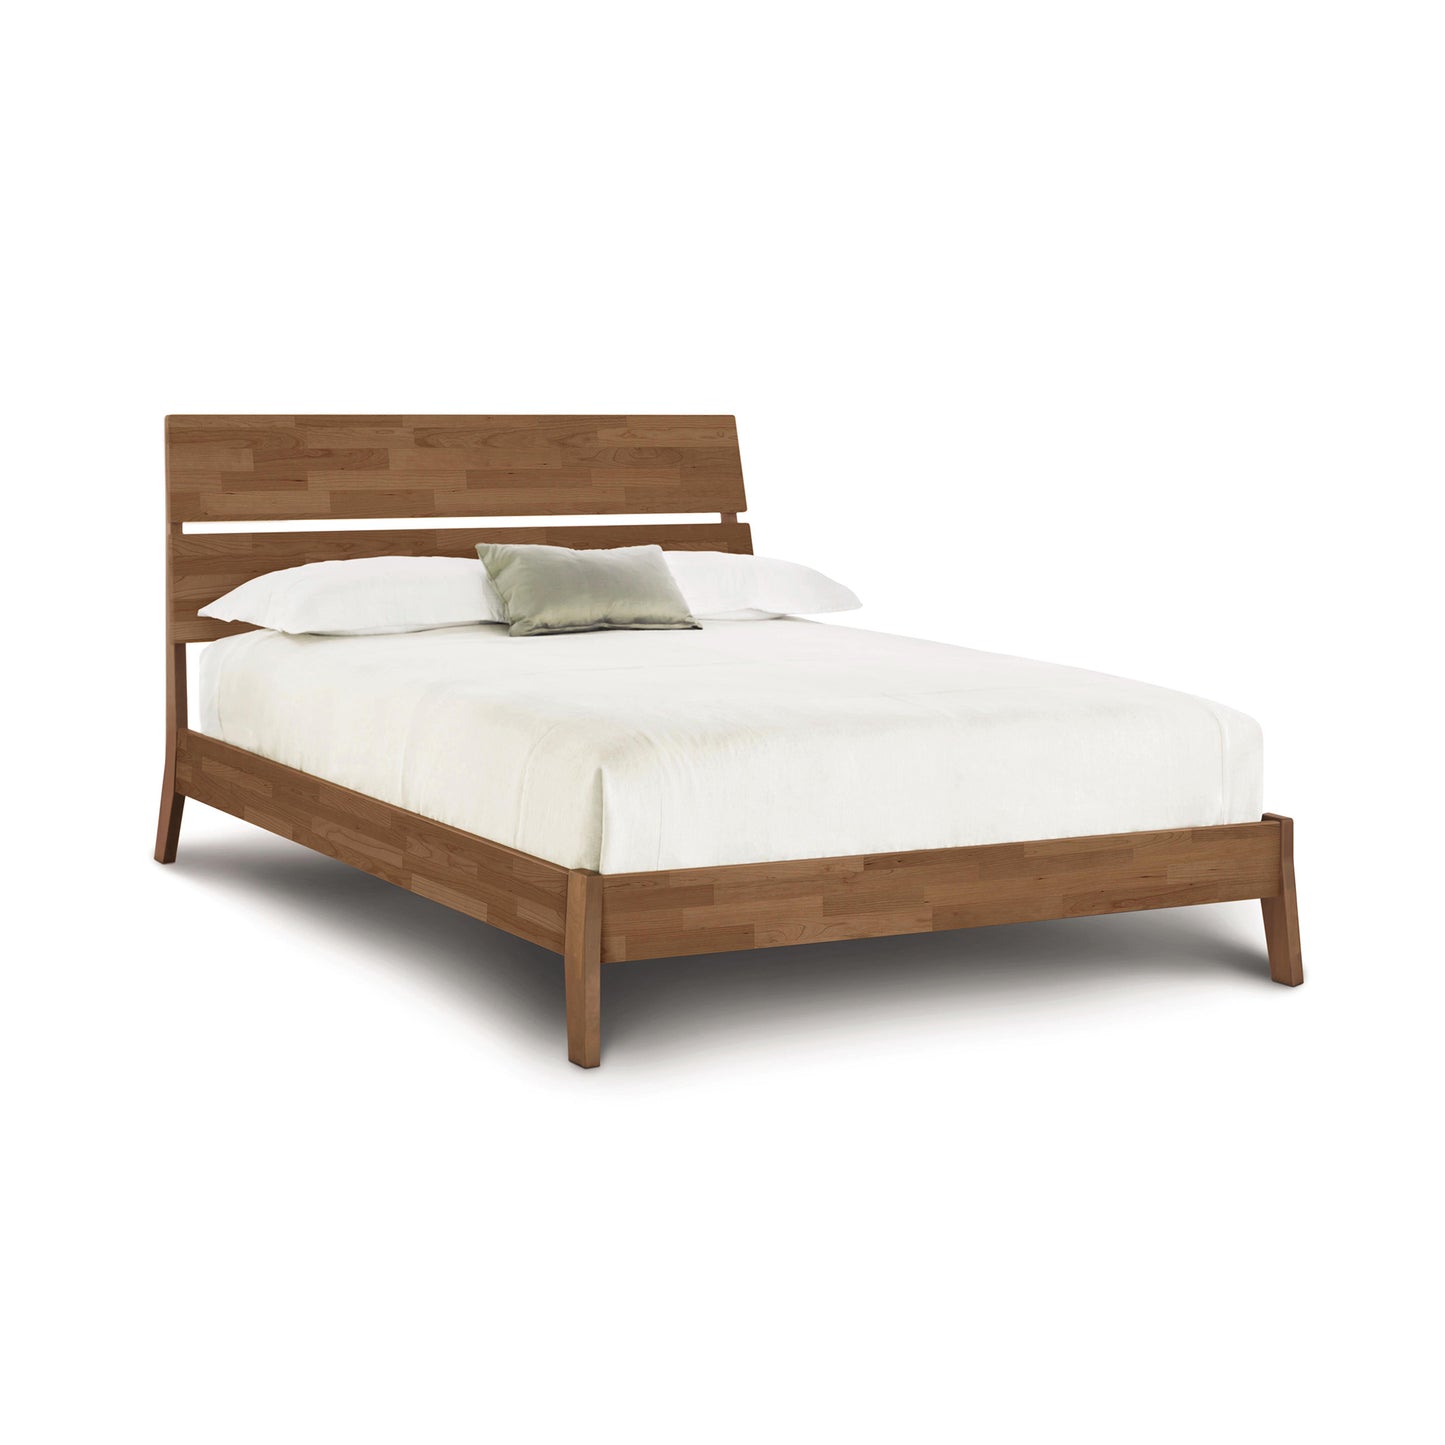 A modern Copeland Furniture Linn Cherry Platform Bed frame with a white bedding set in a plain white background, featuring sustainable furniture design crafted from upcycled sustainably sourced cherry hardwood.